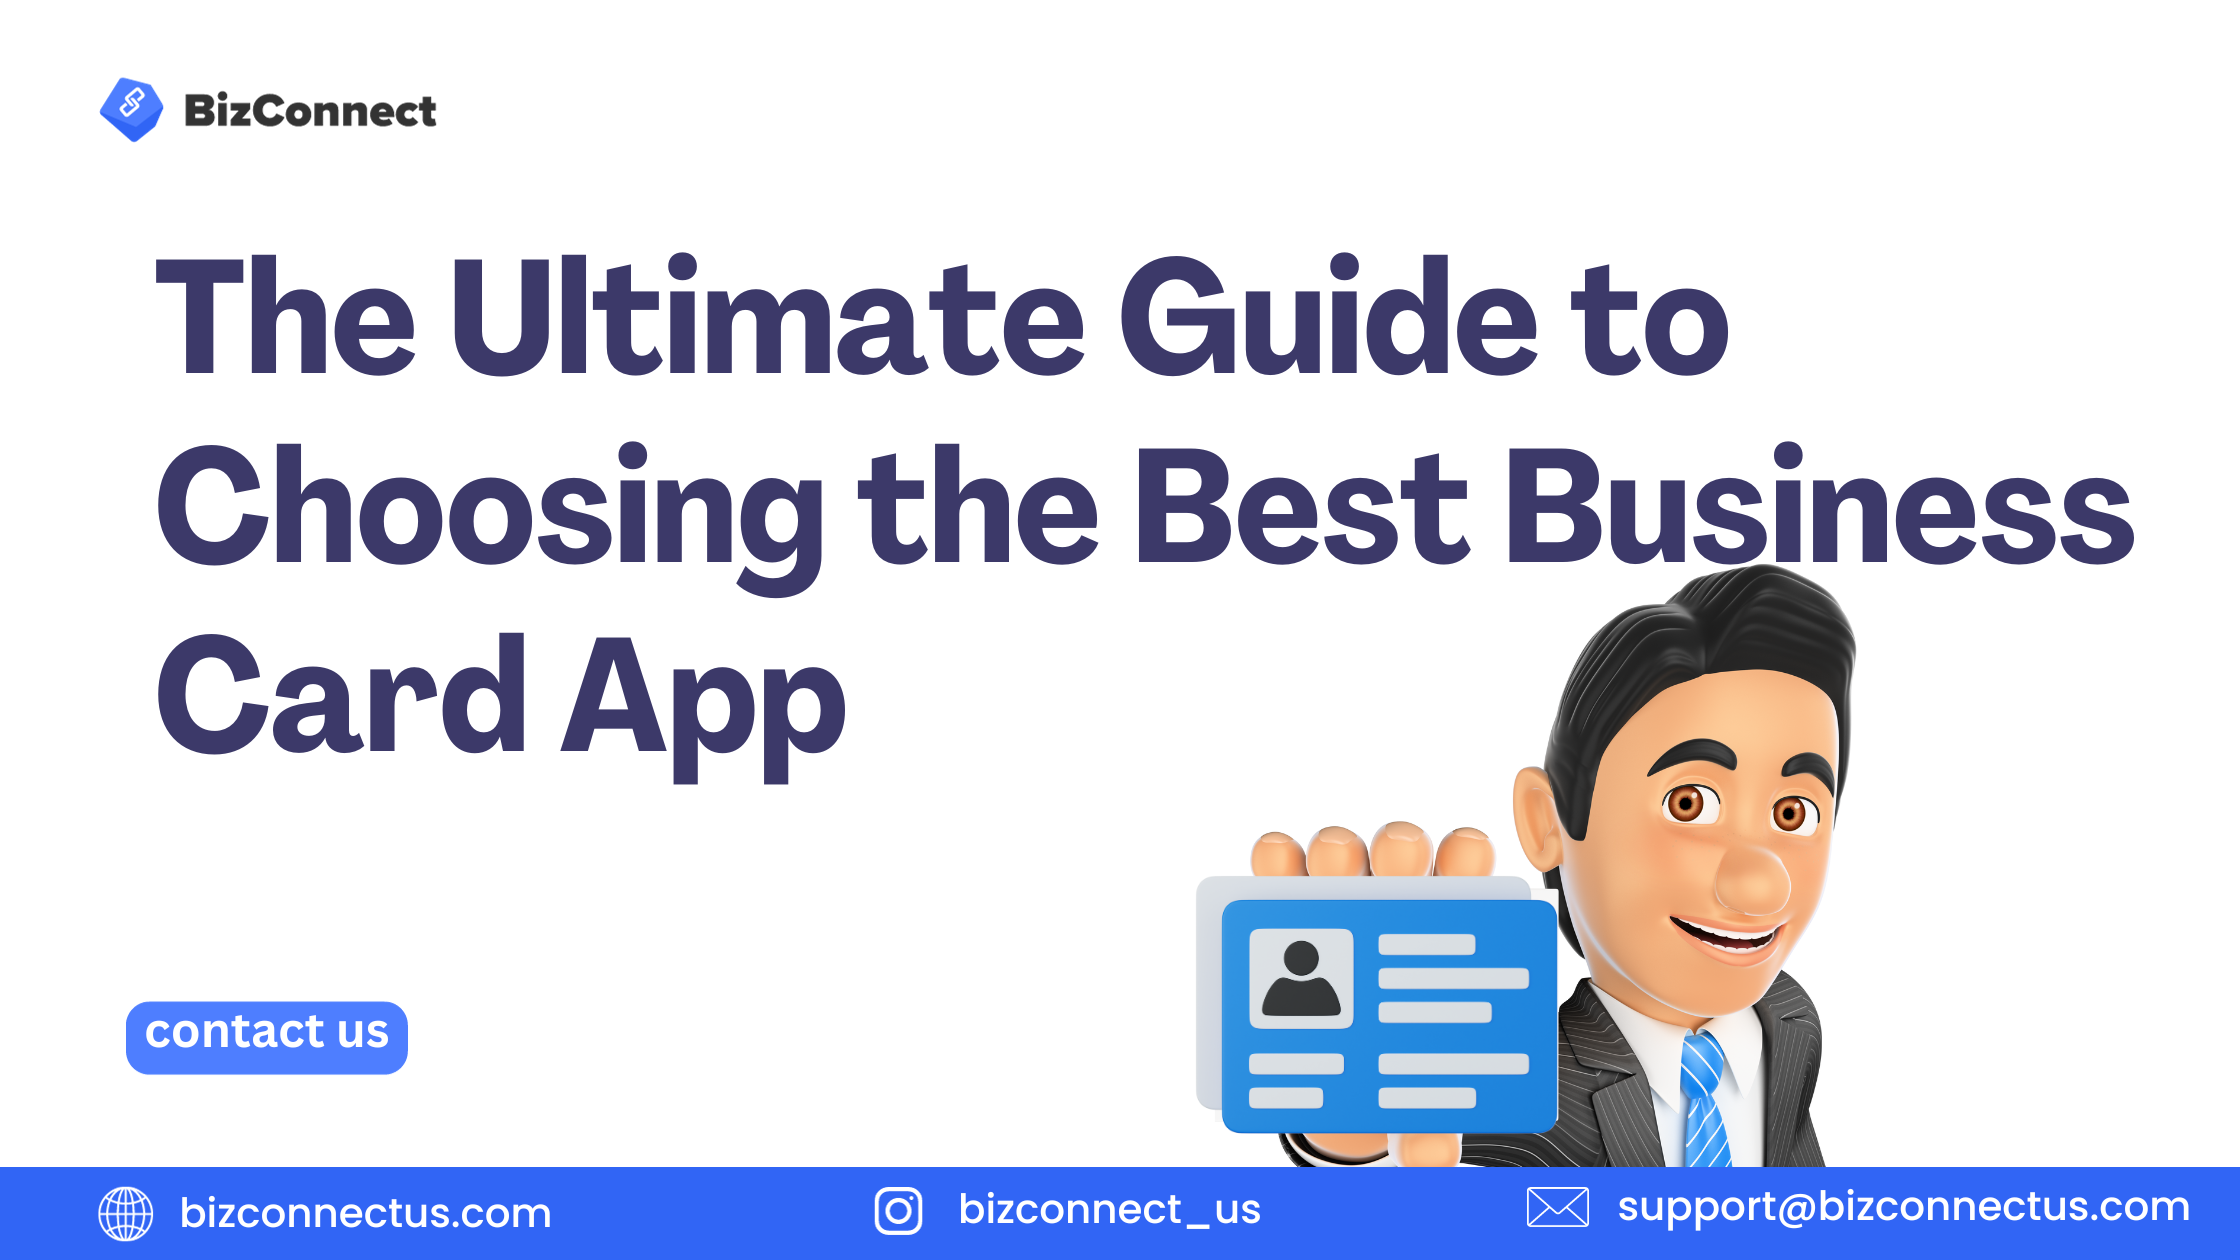 The Ultimate Guide to Choosing the Best Business Card App